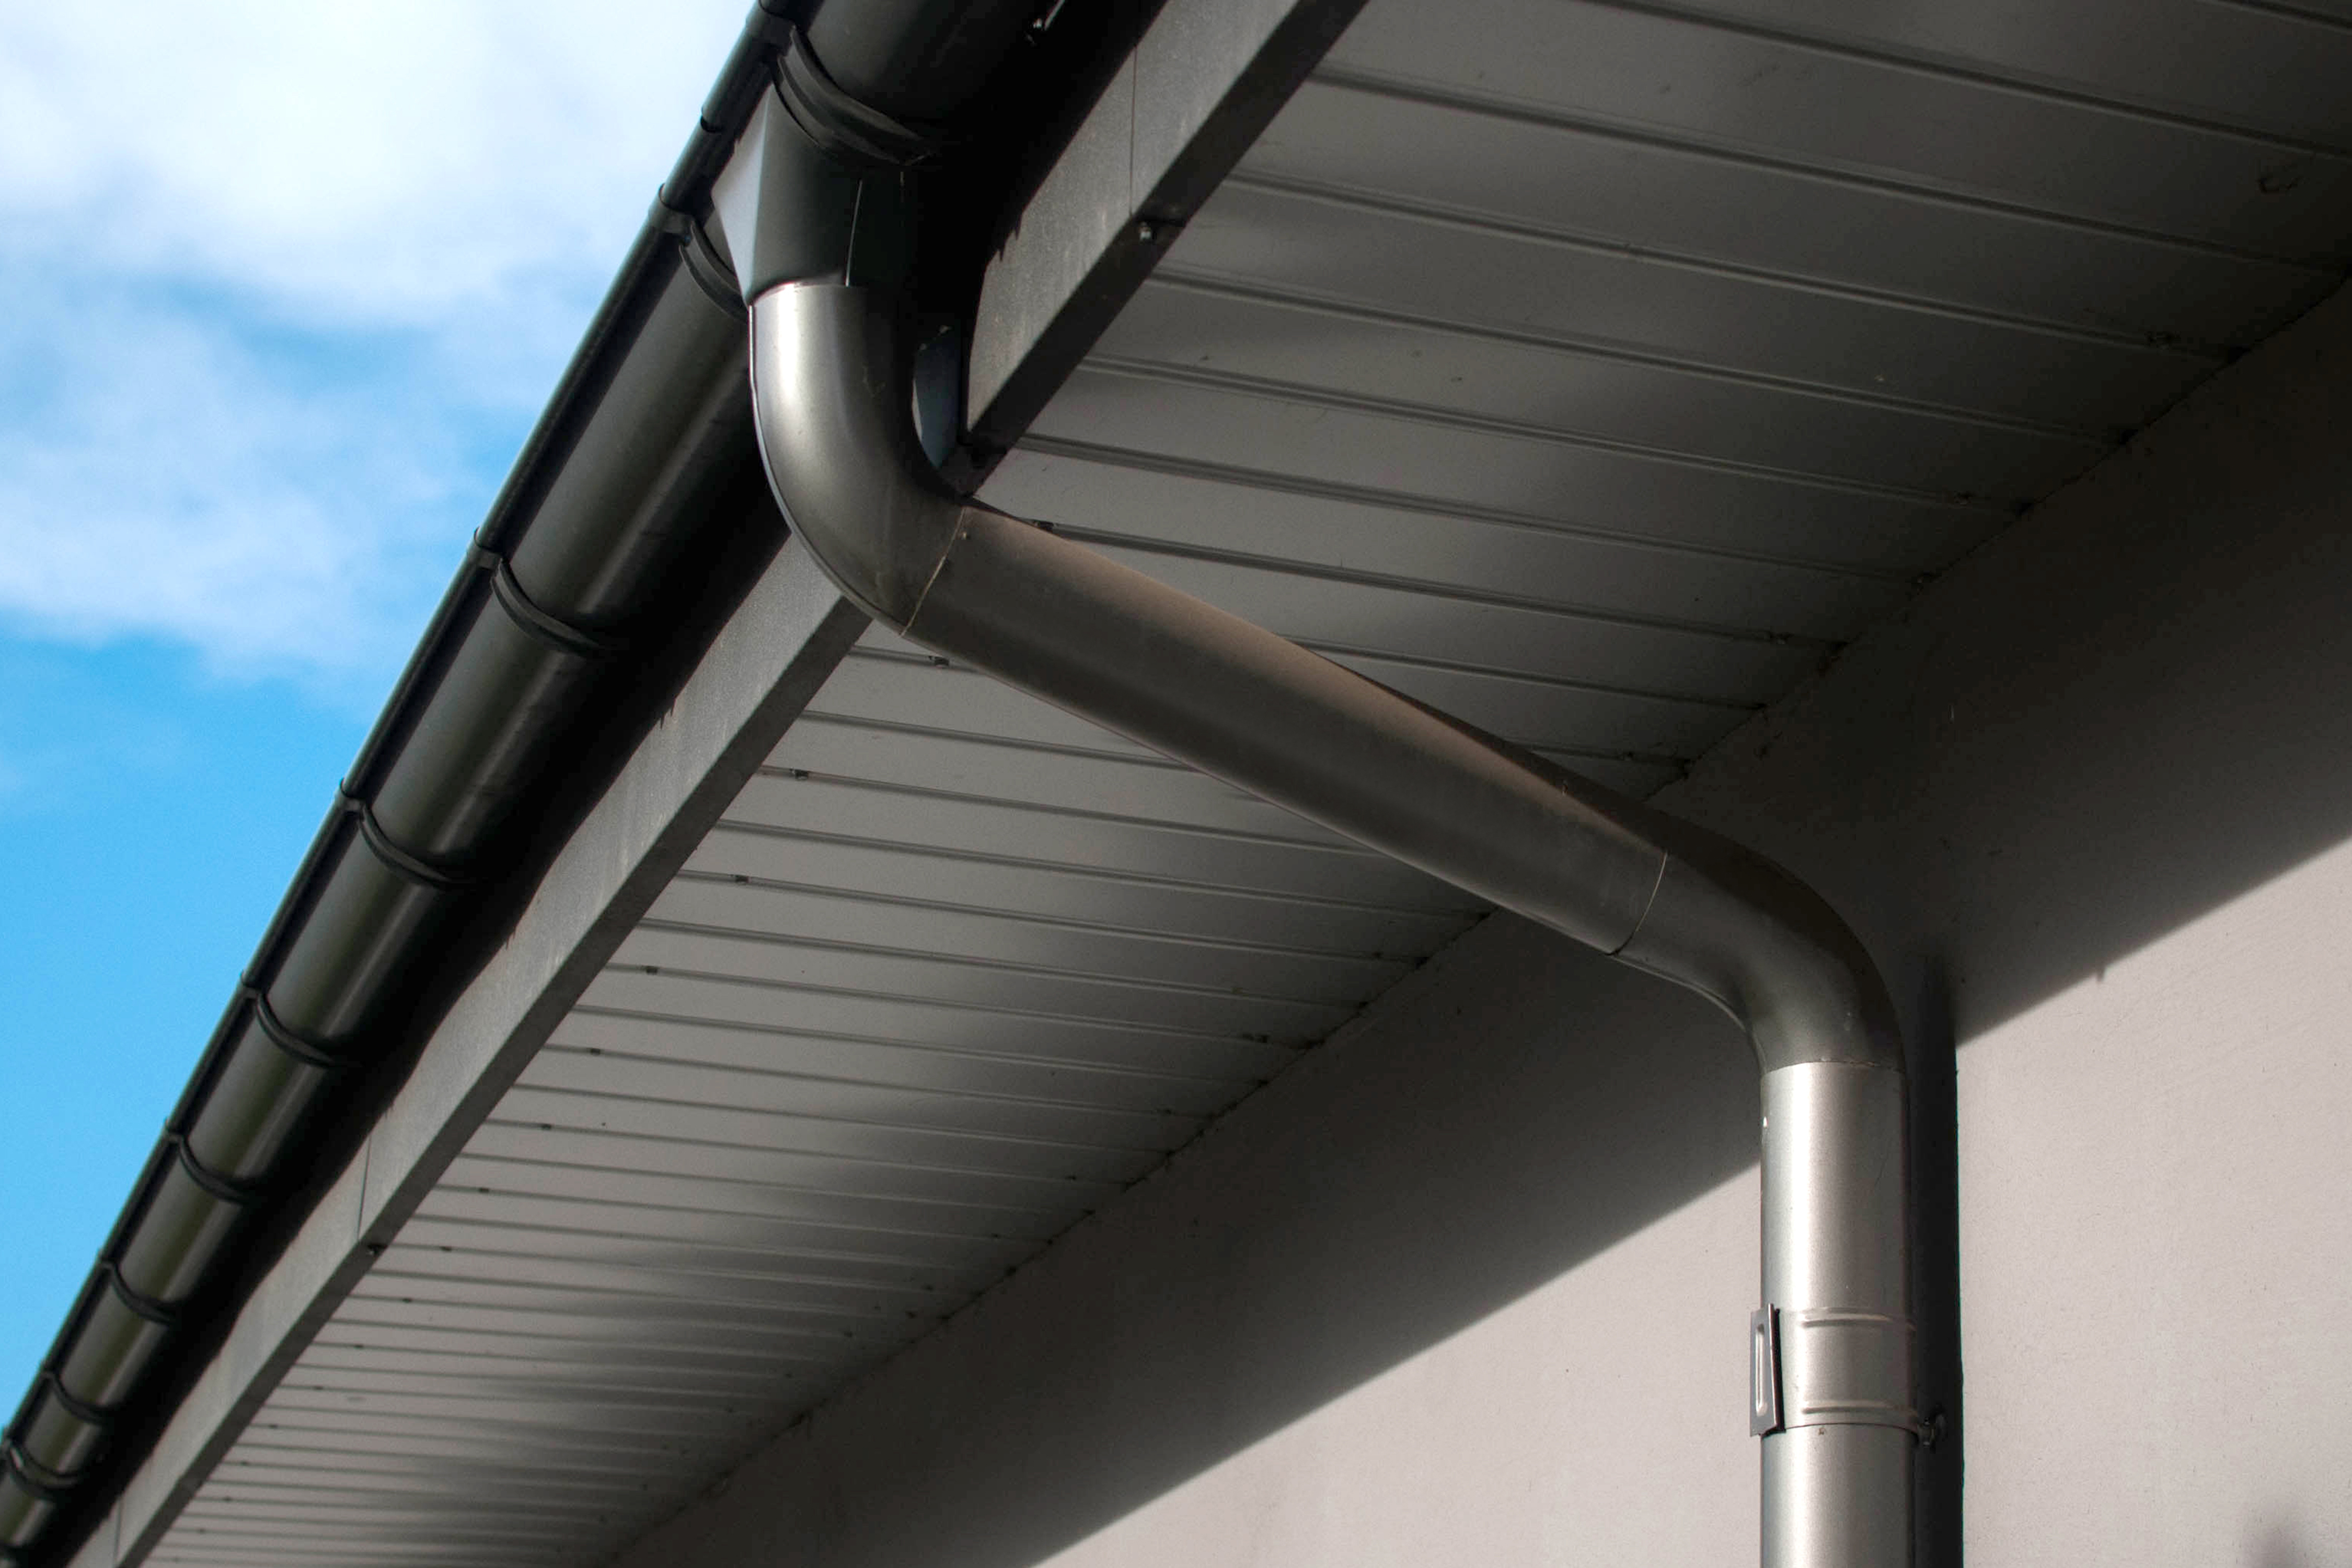 Gutters and downpipes